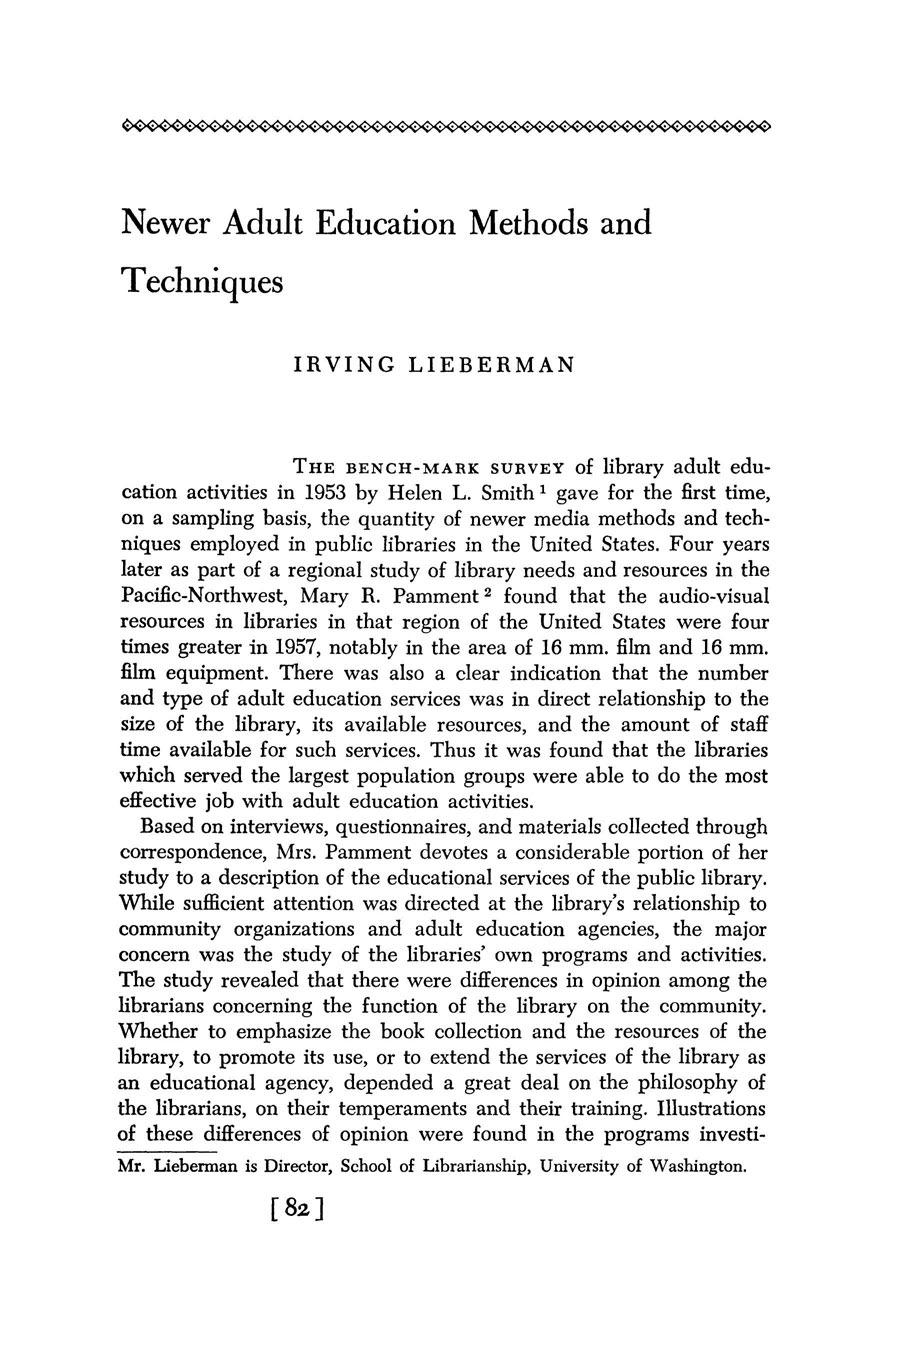 Newer Adult Education Methods and Techniques IRVING LIEBERMAN THE BENCH-MARK SURVEY of library adult education activities in 1953 by Helen L.